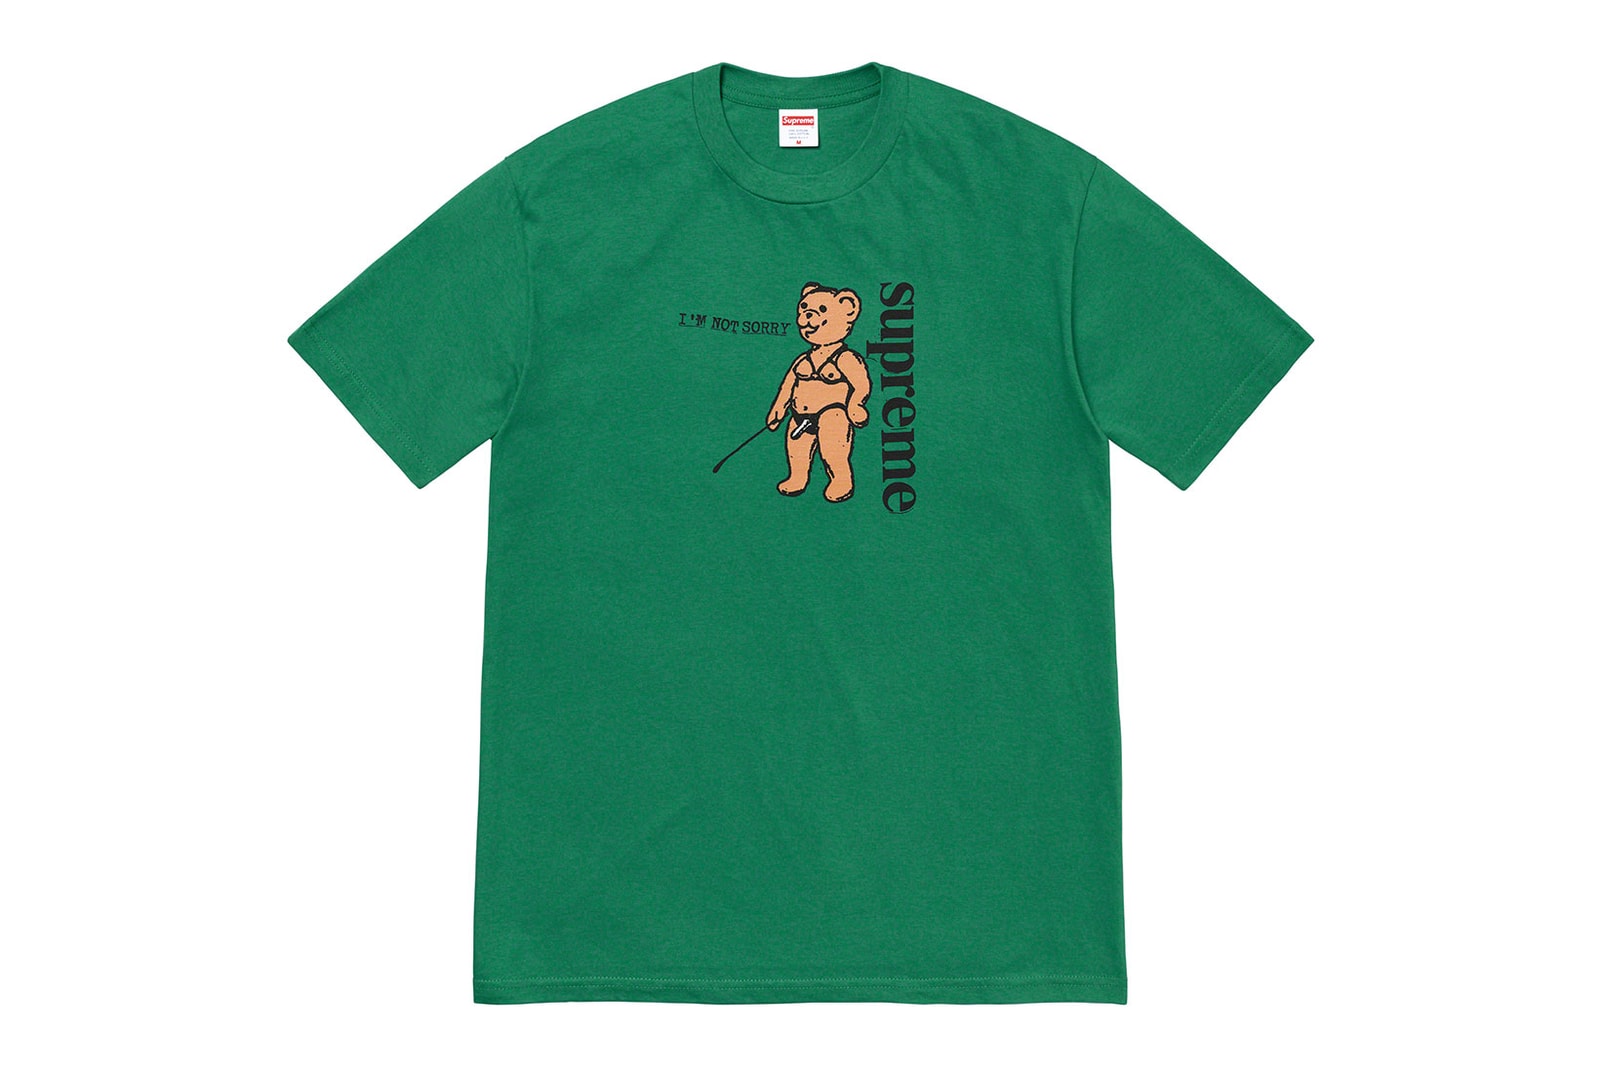 supreme new york spring graphic t-shirts tees miles davis anna nicole smith release date info